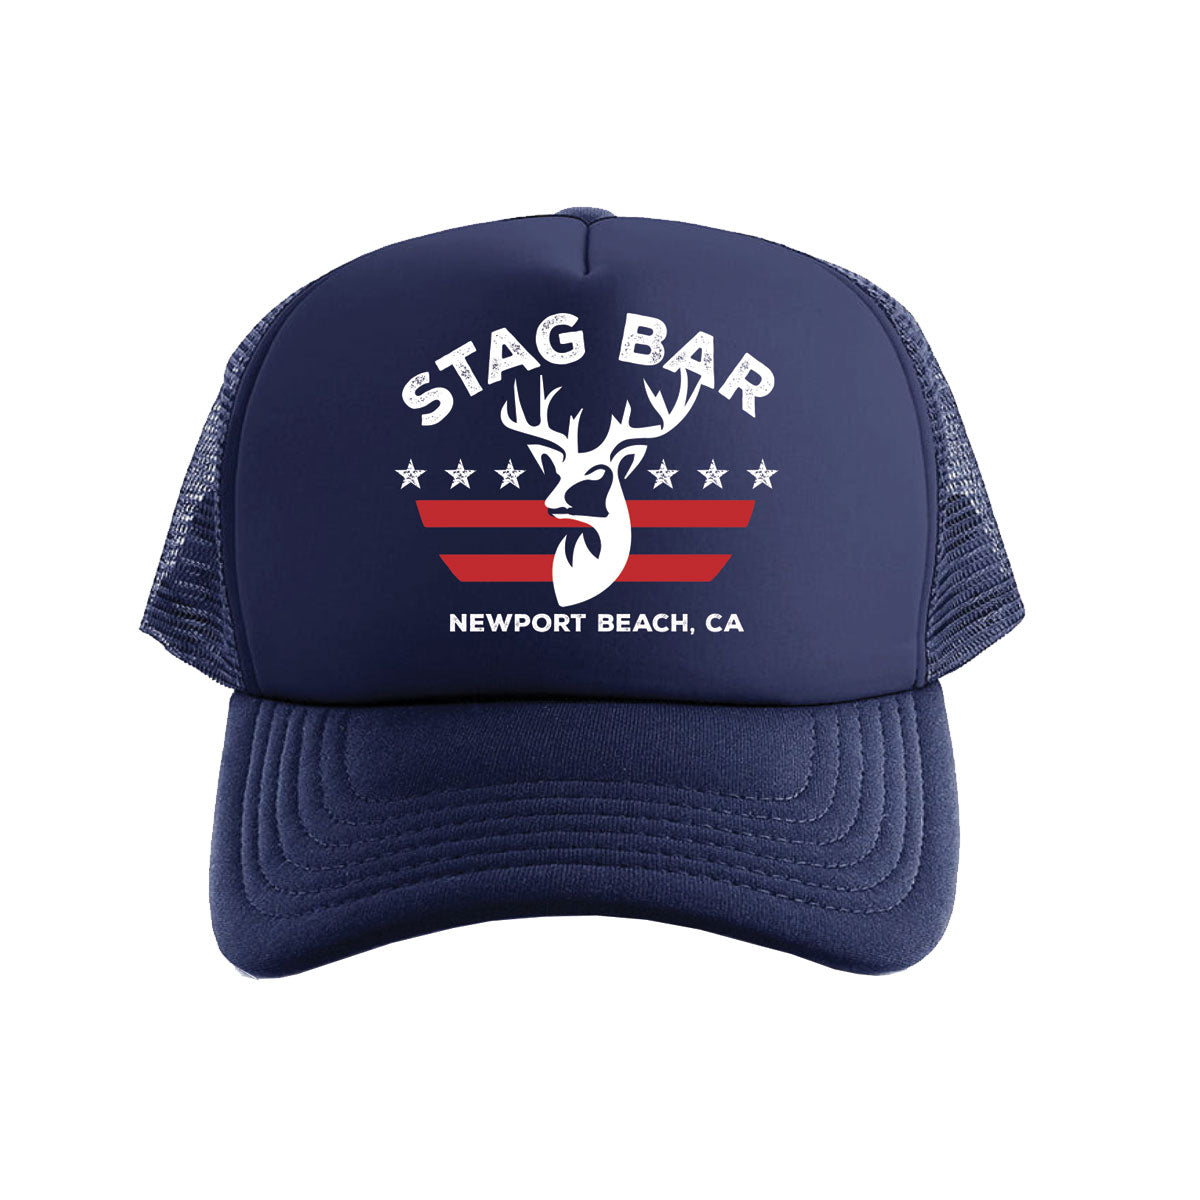 All American Stag Trucker hat